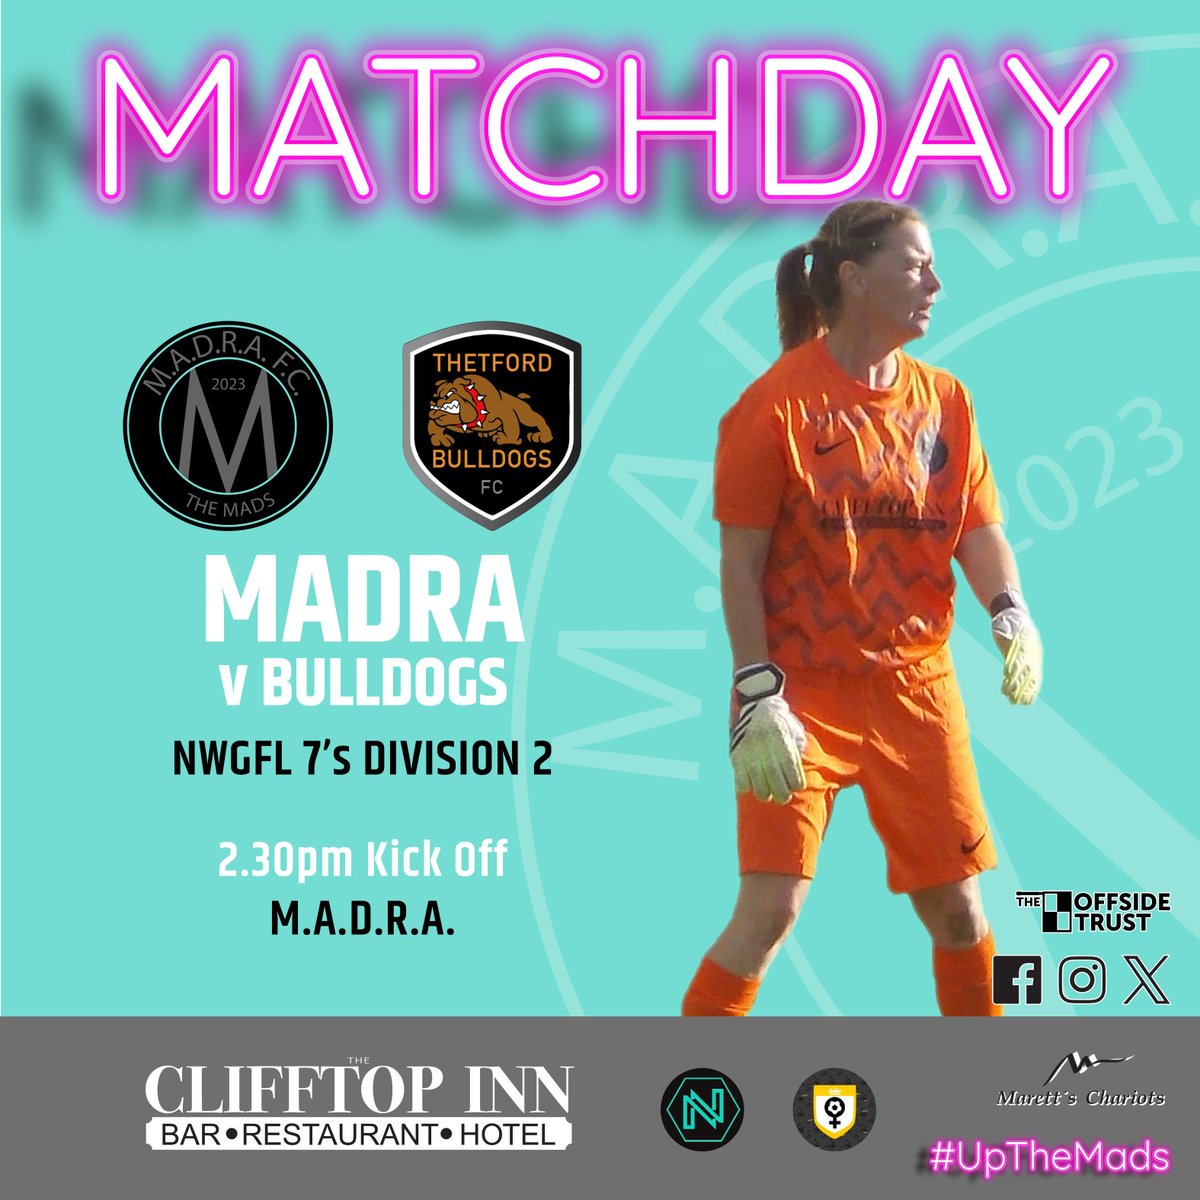 MATCHDAY!
Women play their final game of the season & they welcome Bulldogs FC
#UpTheMads #WelcomeToTheMadhouse #Madness #TheMads #MadraFC #NorfolkFootball #OneStepBeyond